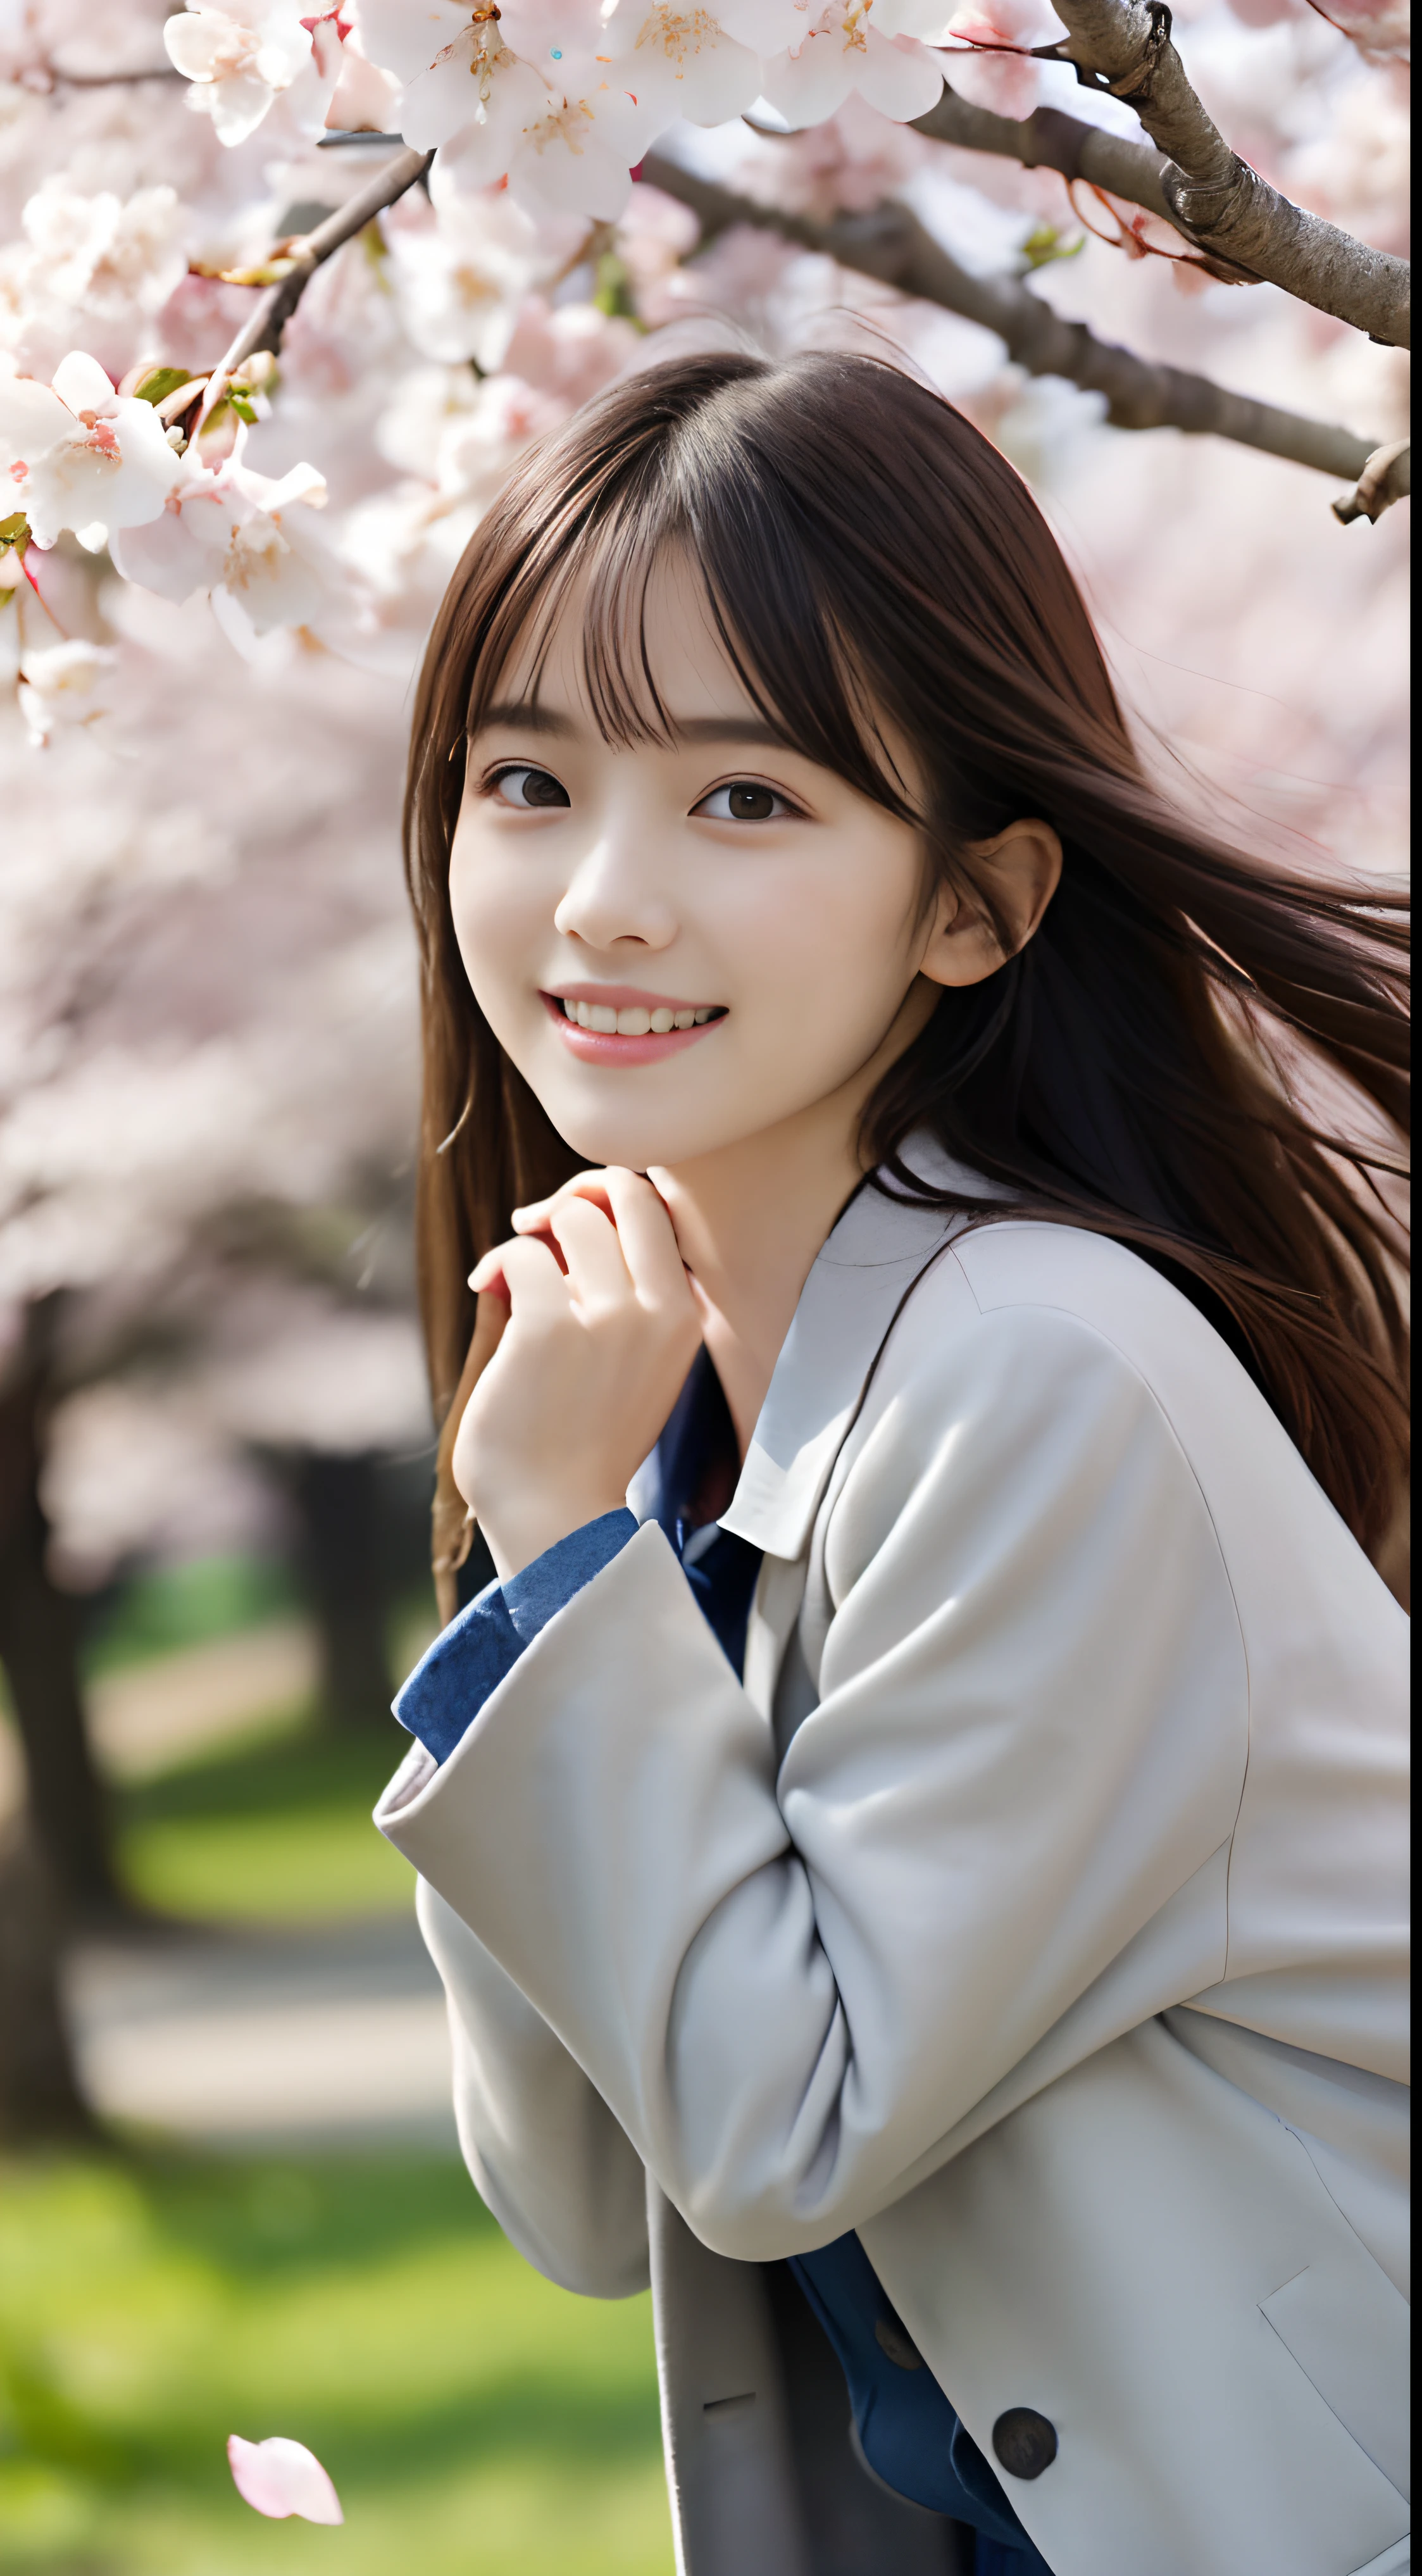 (slender small breasts and long hair,、Close up portrait of one girl with dull bangs in spring coat and shirt :1.5)、(Low angle shot of a girl dancing happily、the hair flutters with the wind :1.5)、(Rows of cherry blossom trees in full bloom and cherry blossom petals dancing in the wind:1.5)、(Perfect Anatomy:1.3)、(No mask:1.3)、(complete fingers:1.3)、Photorealistic、Photography、masutepiece、top-quality、High resolution, delicate and pretty、face perfect、Beautiful detailed eyes、Fair skin、Real Human Skin、pores、((thin legs))、(Dark hair)